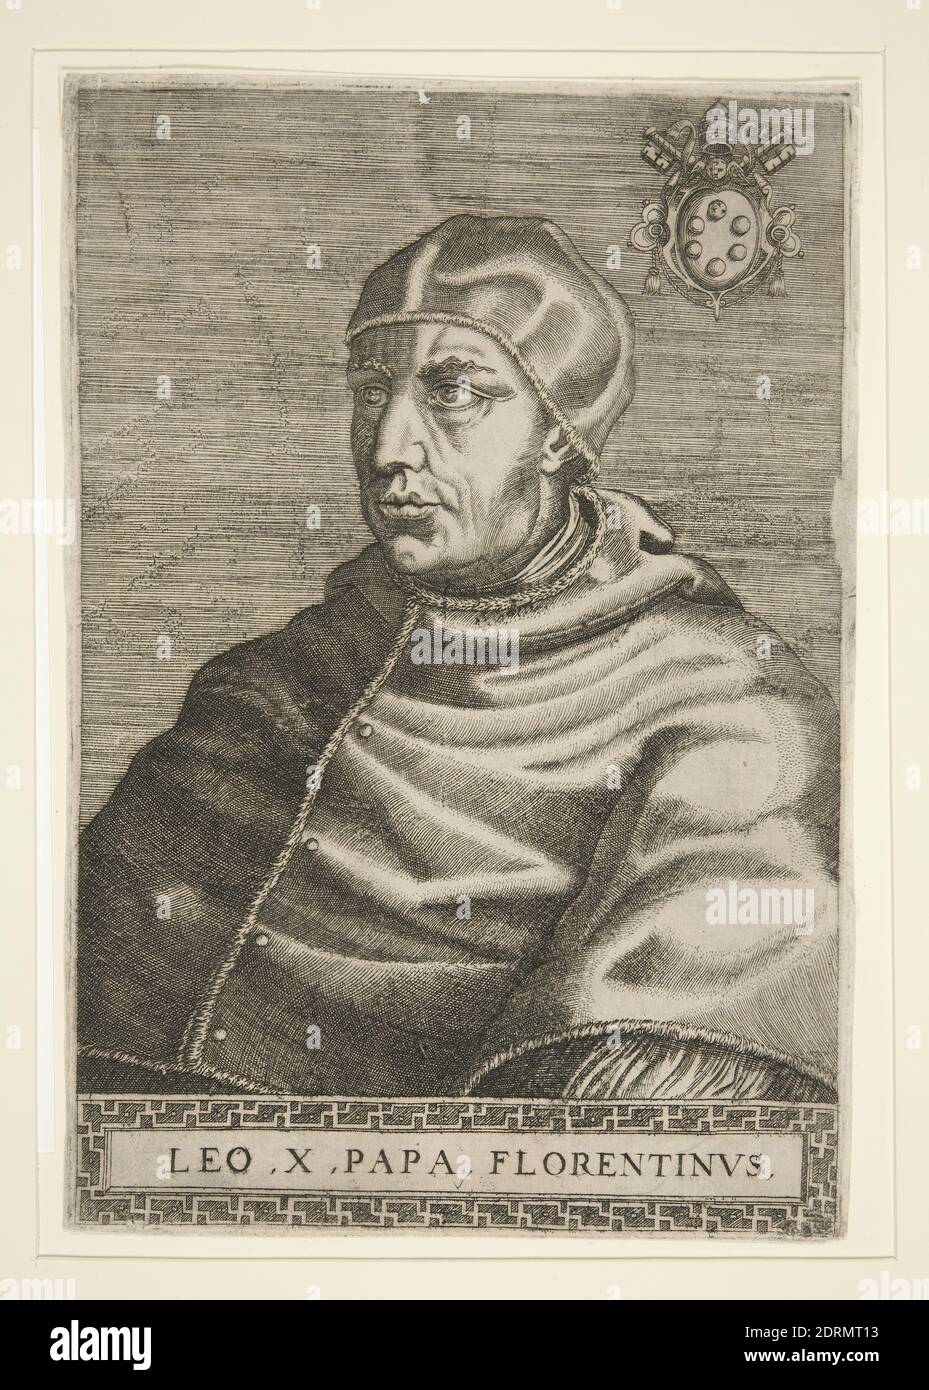 Pope Leo X, Engraving, sheet: 24.3 × 16.4 cm (9 9/16 × 6 7/16 in.), Made in  Italy, Italian, 16th century, Works on Paper - Prints Stock Photo - Alamy